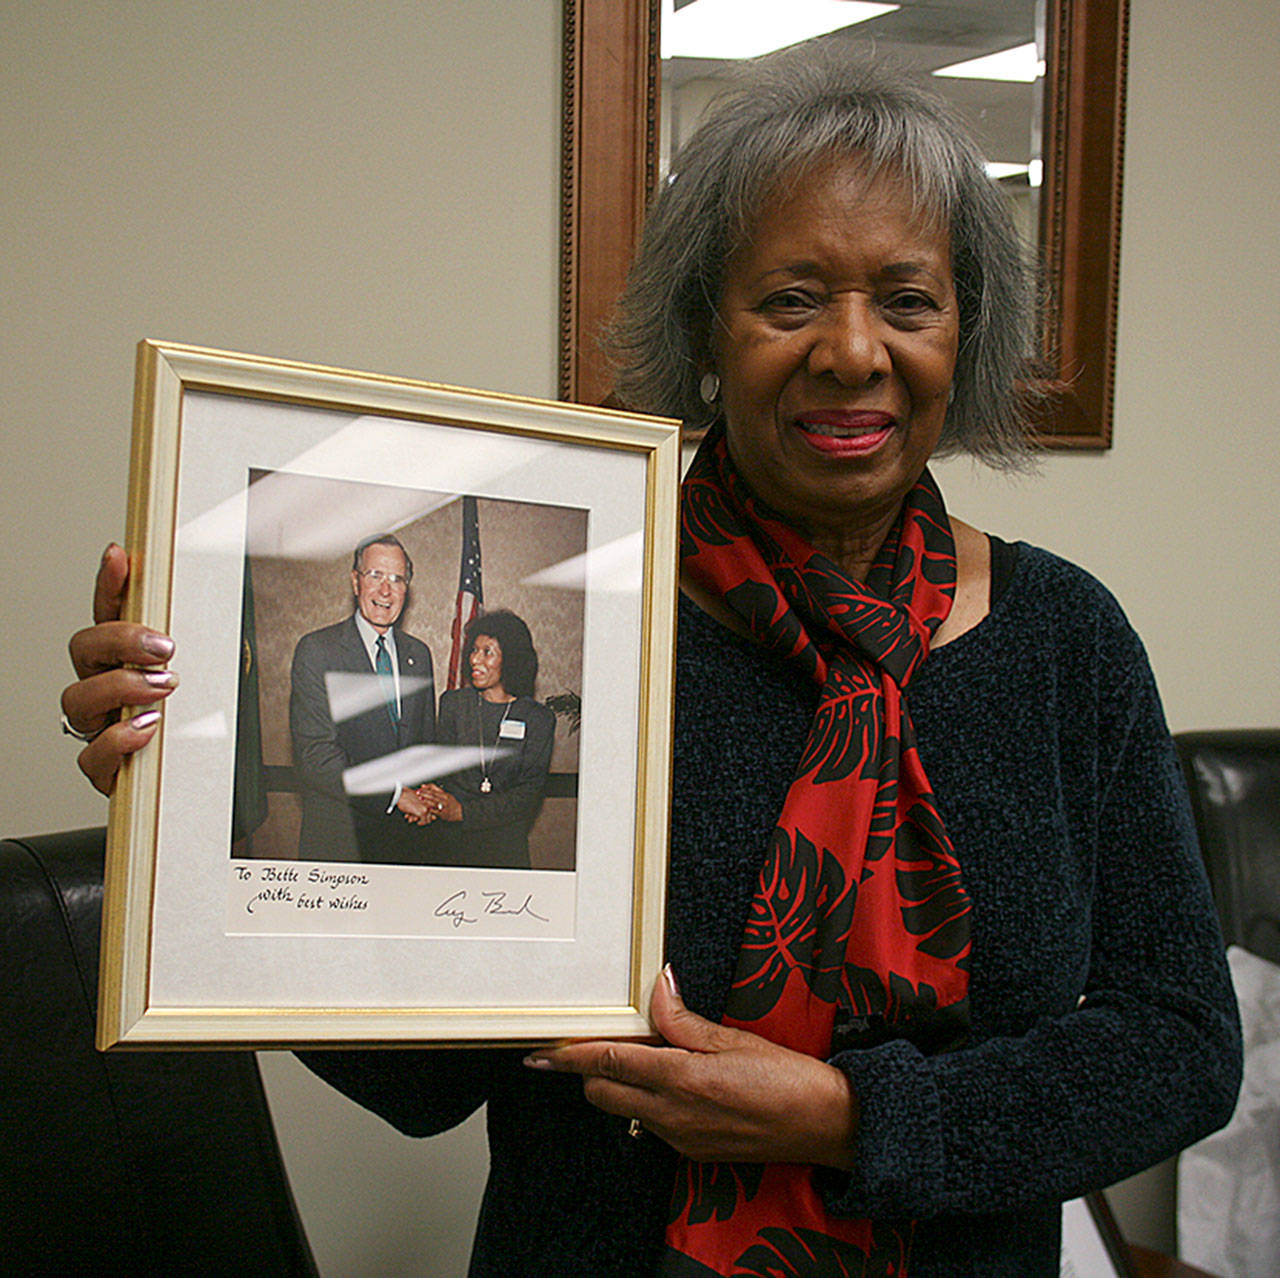 Bette Simpson-Opstad shared her experience working with the late former President George H.W. Bush. Carrie Rodriguez/staff photo